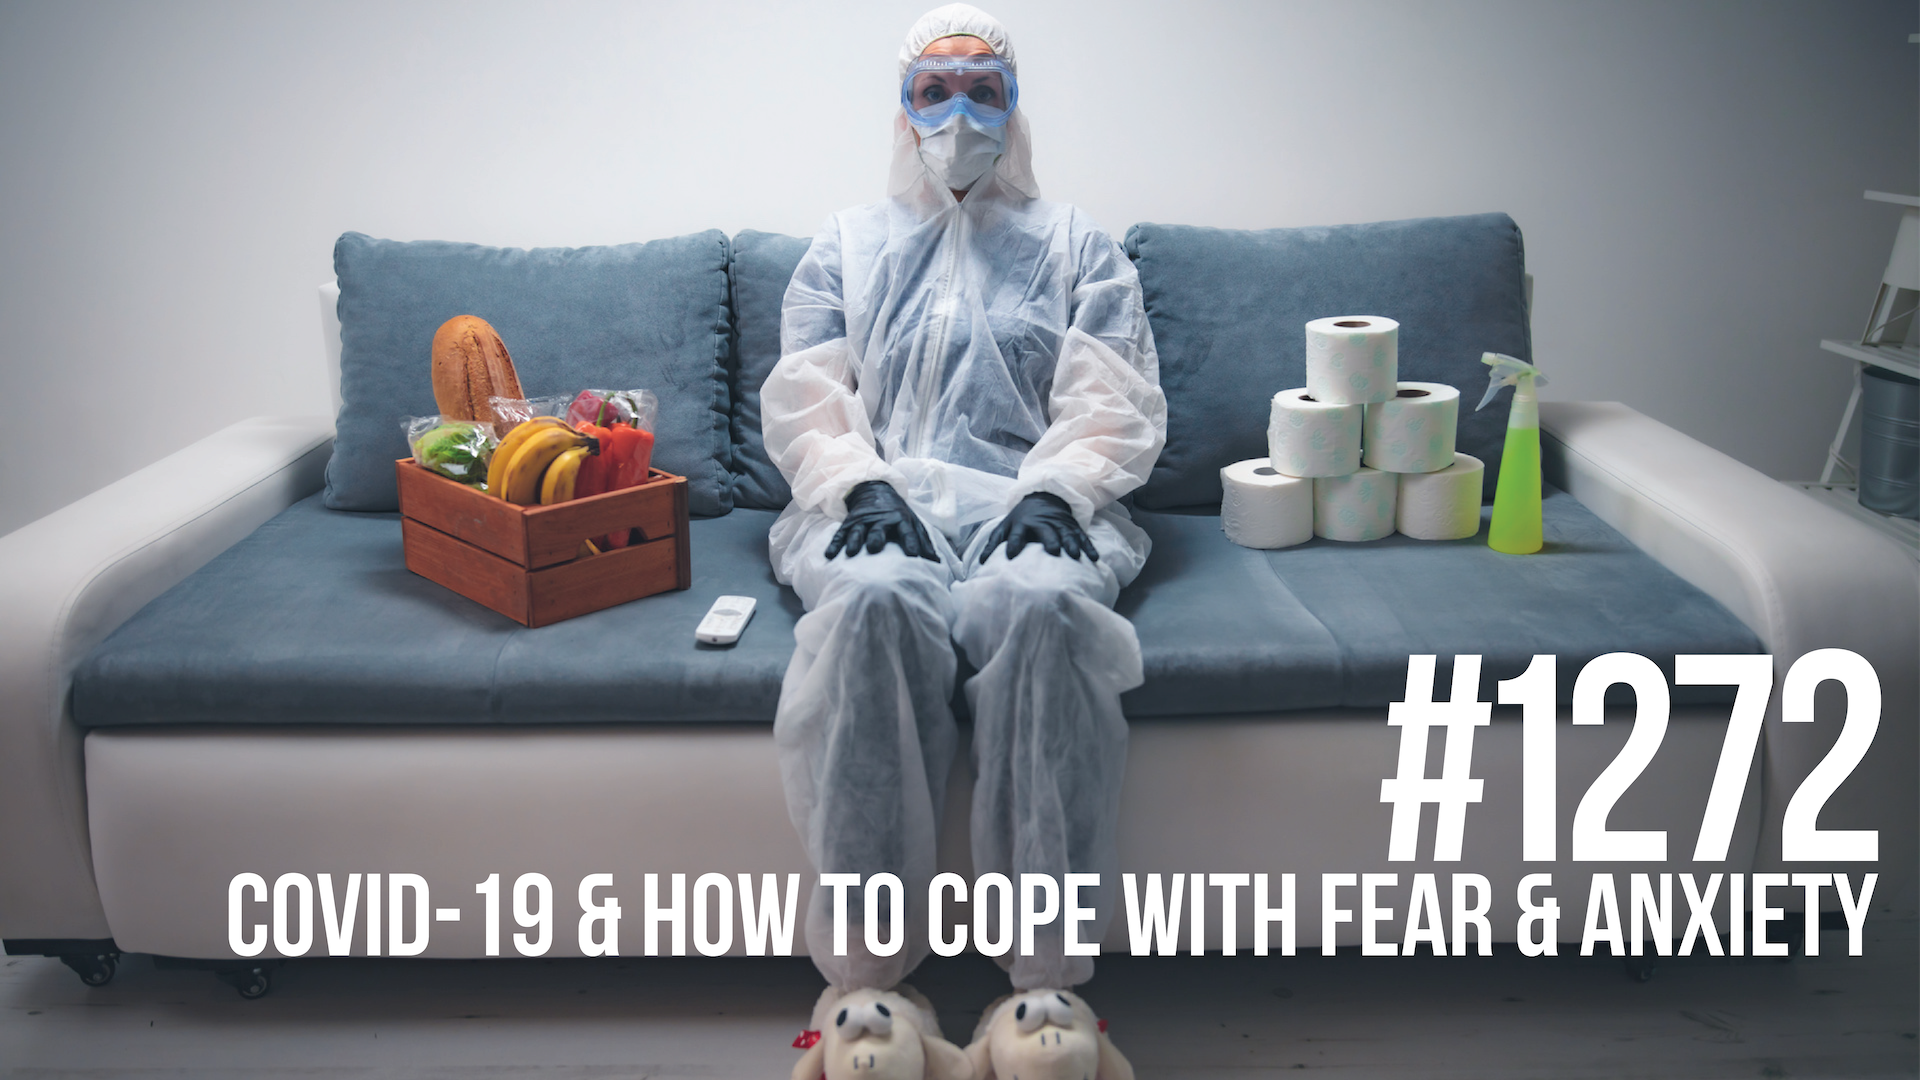 1272: COVID-19 & How to Cope with Fear & Anxiety